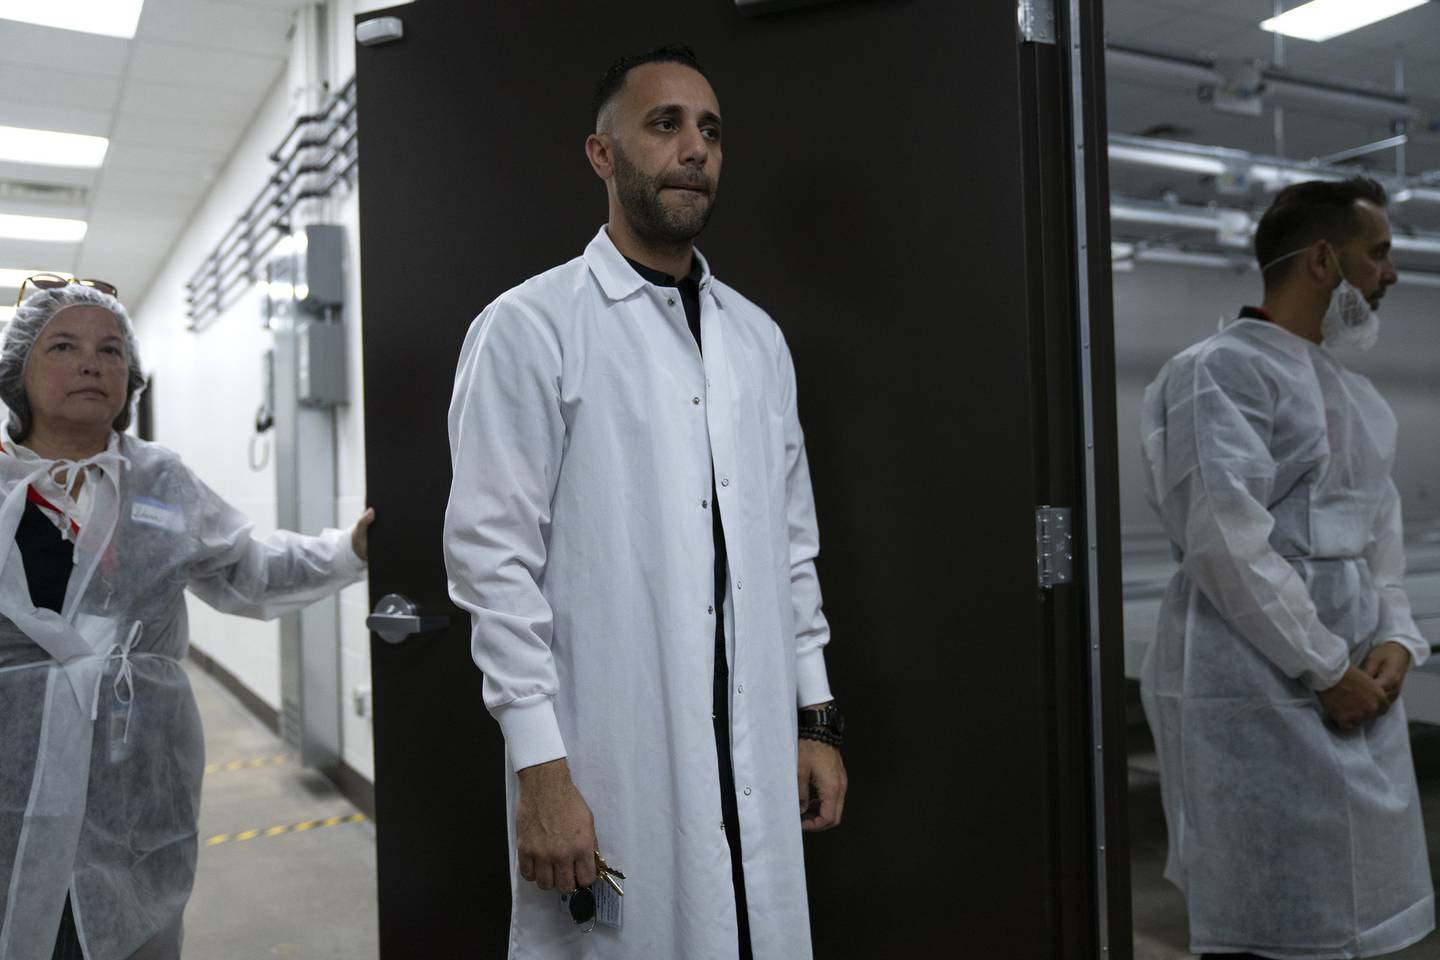 Mohammad Joudeh, director of operations at Star Buds in Rockford, gives a tour of the first craft cannabis grower in Illinois on Oct. 3, 2022.